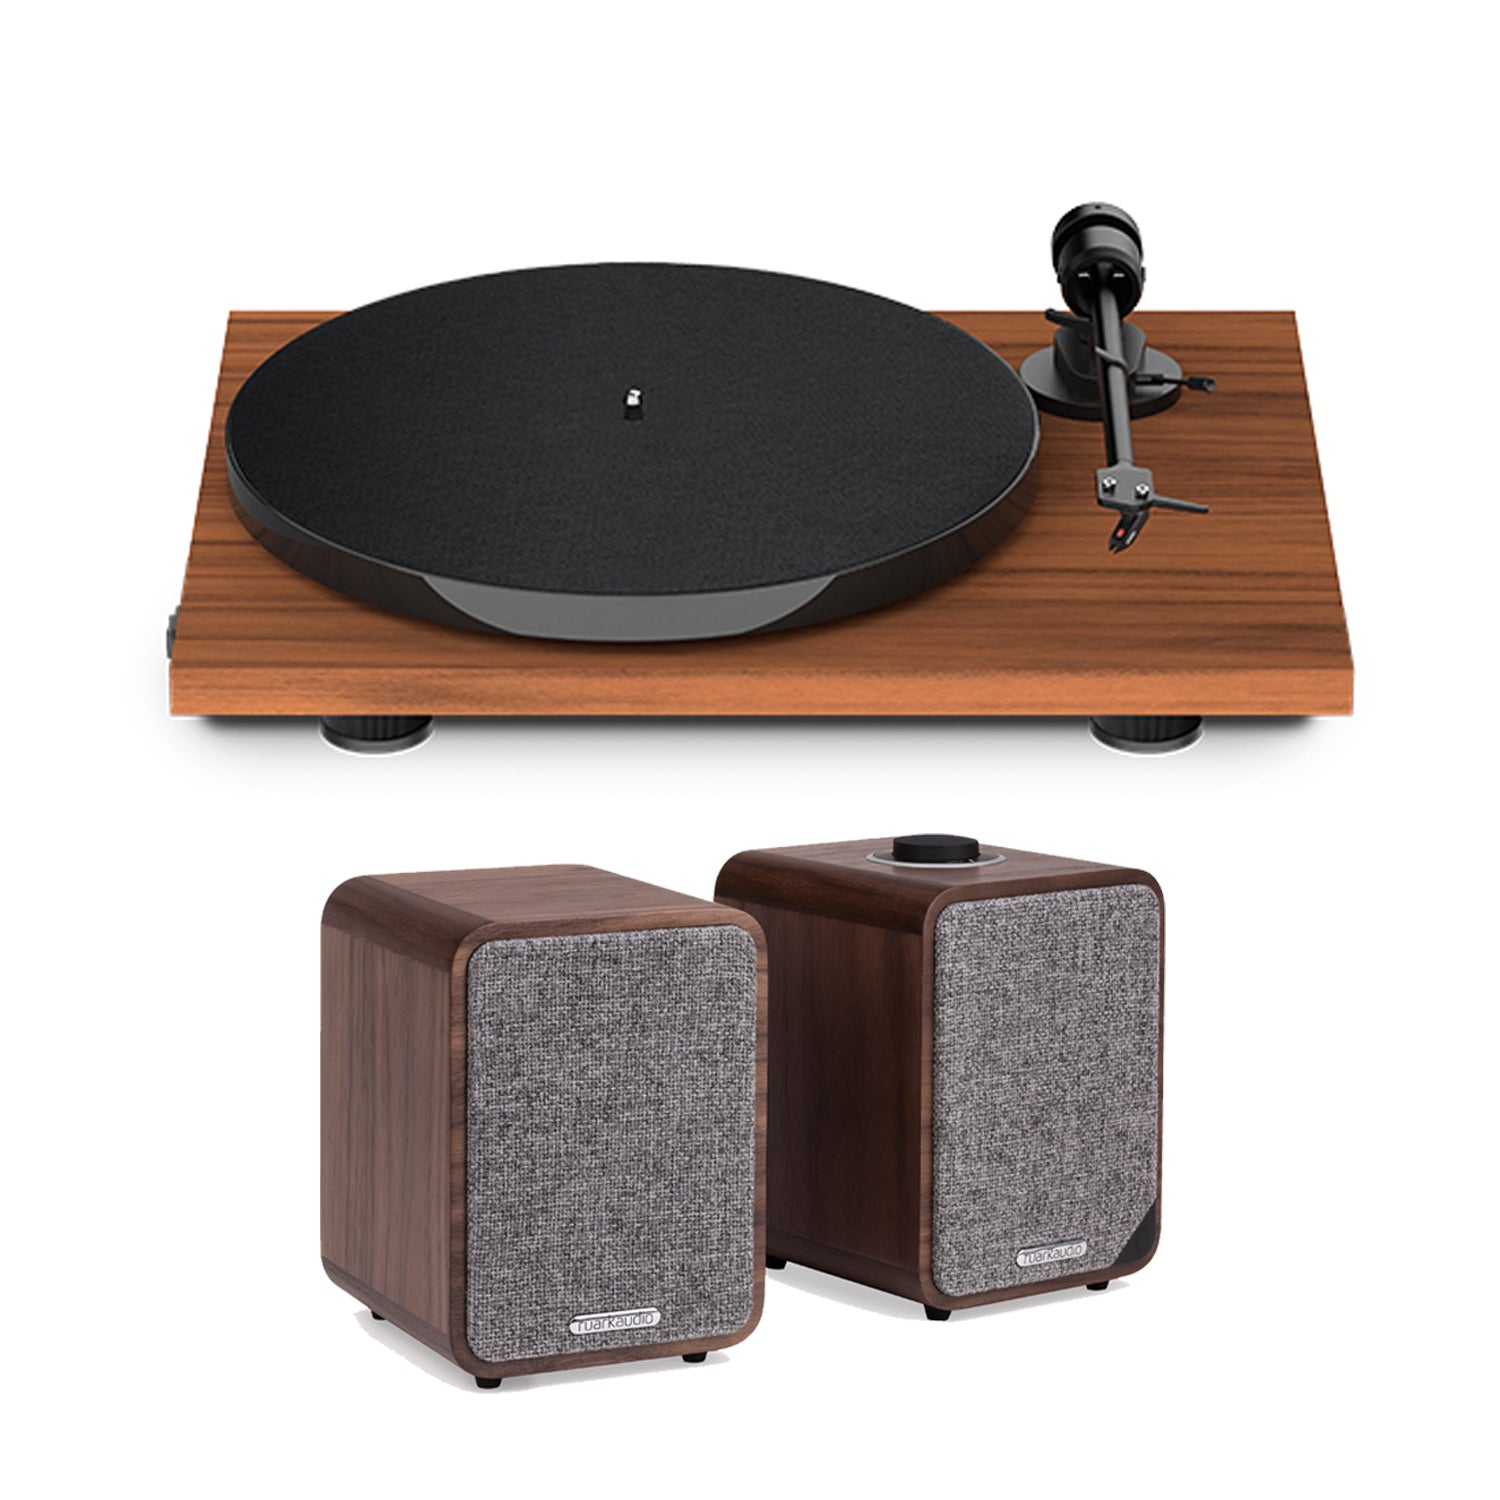 Image of Pro-Ject E1PHONOW-MR1MK2W E1 Phono Turntable in Walnut with Ruark MR1 MK2 Speakers in Walnut Bundle